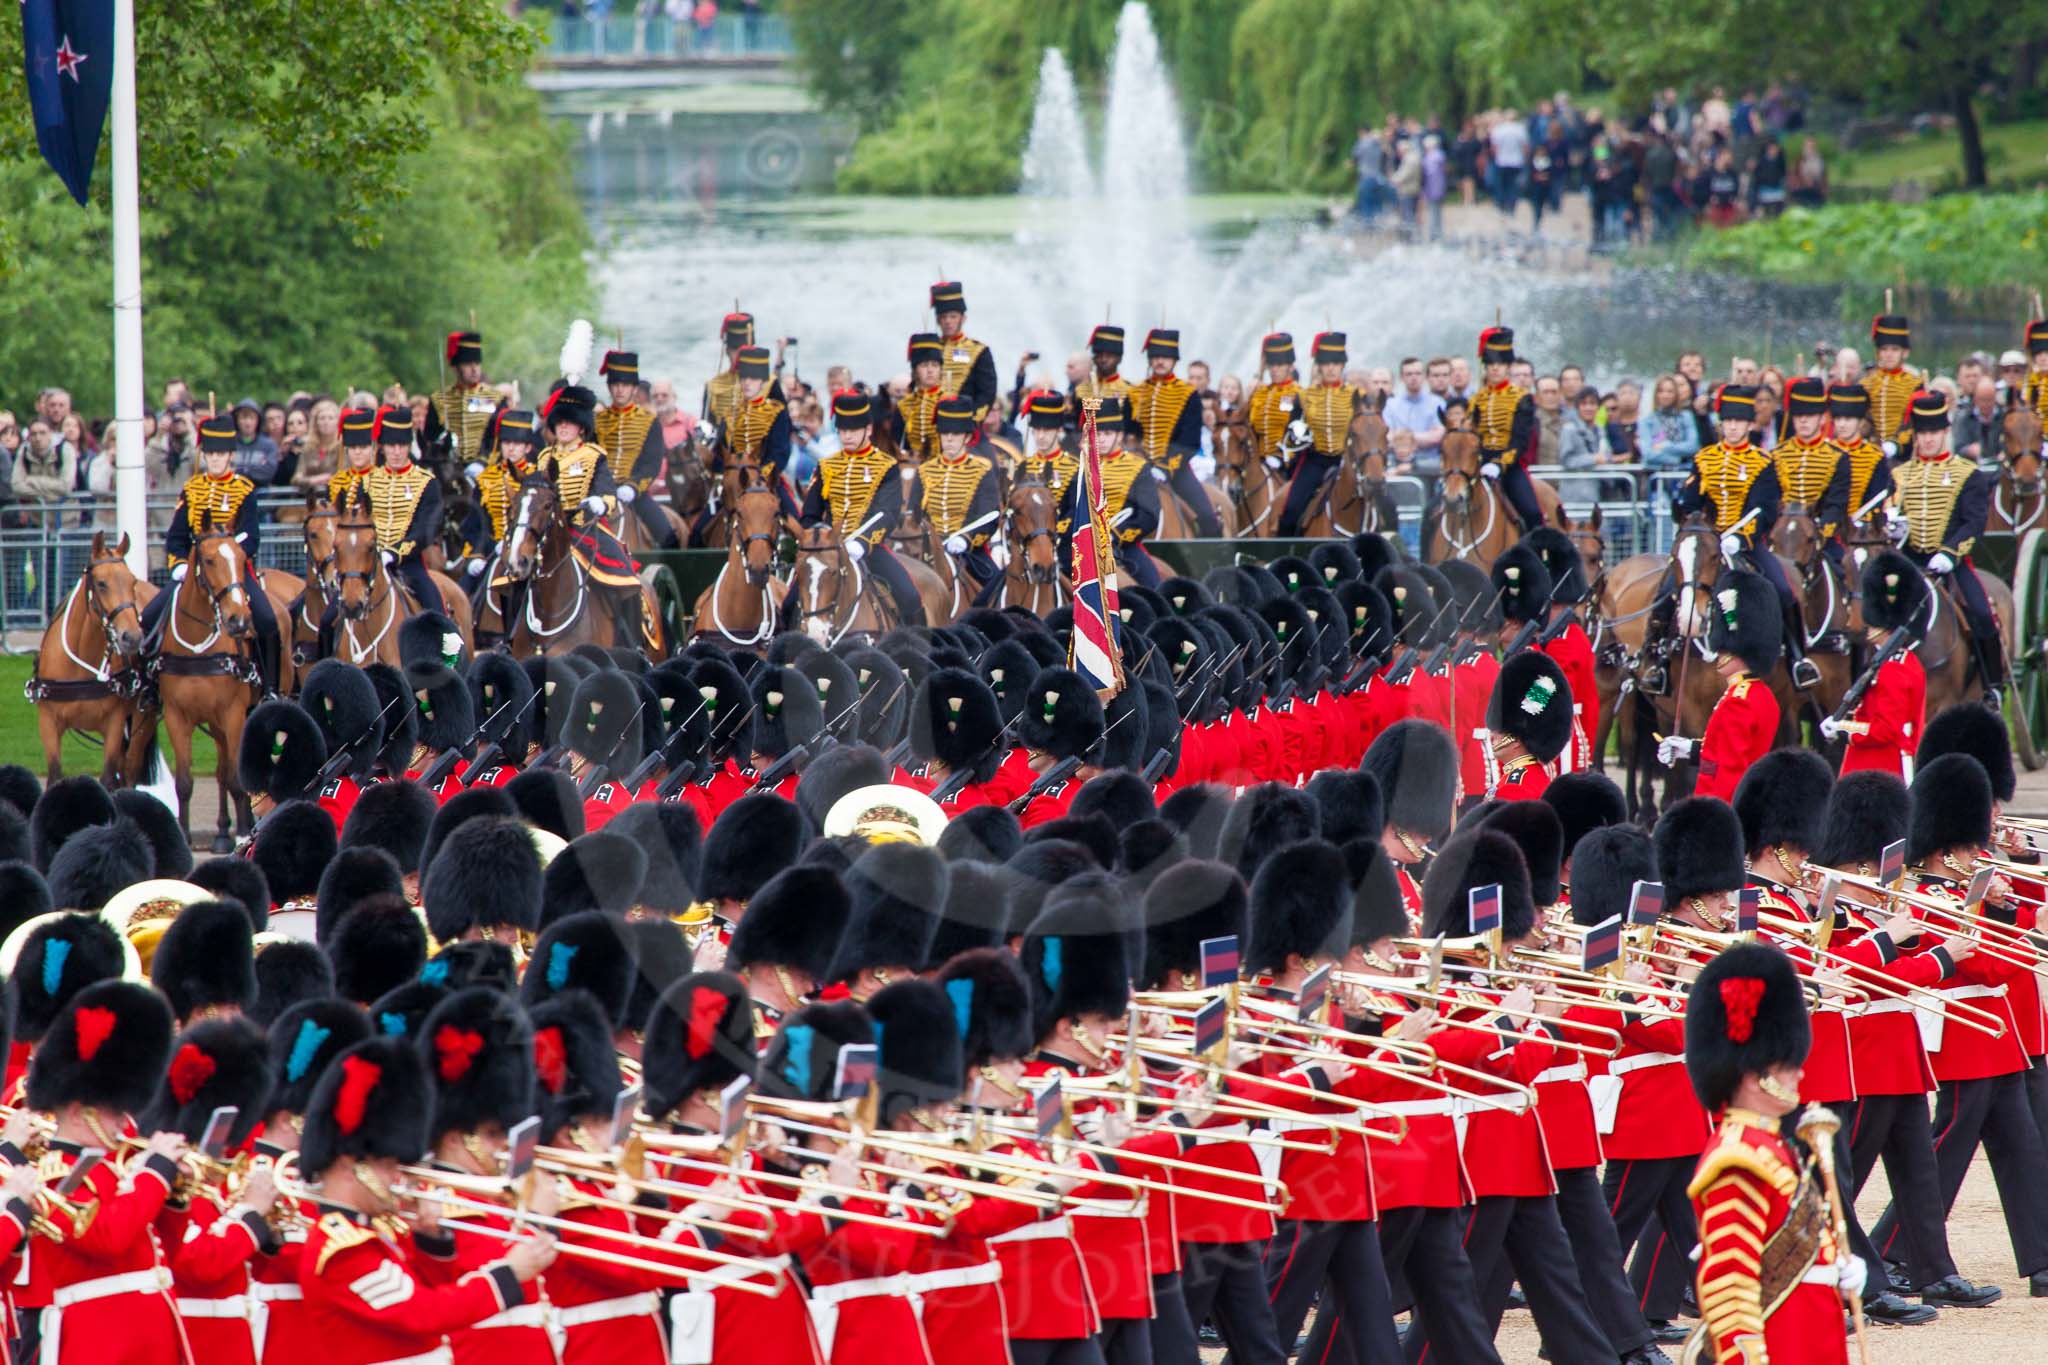 Major General's Review 2013: No. 1 Guard (Escort to the Colour),1st Battalion Welsh Guards, at the begin of the March Past..
Horse Guards Parade, Westminster,
London SW1,

United Kingdom,
on 01 June 2013 at 11:29, image #455